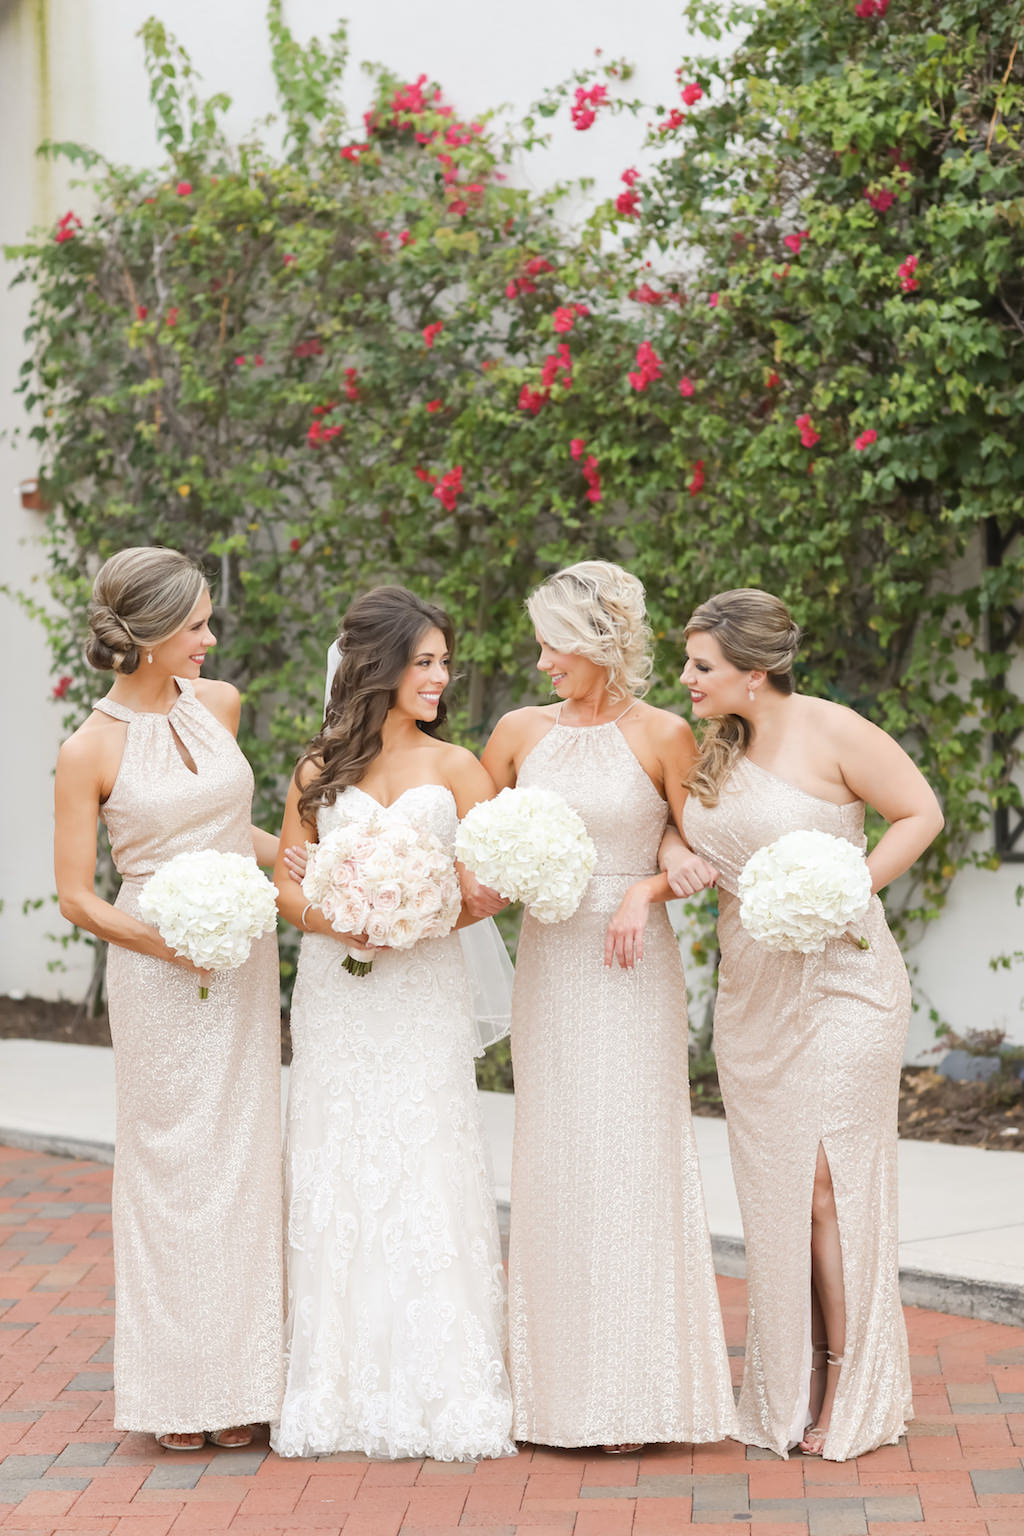 Outdoor Bridal Party Portrait with White Floral Bouquet, Bridesmaids in Champagne Mismatched Bill Levkoff Dresses, Bride in Morilee by Madeline Gardner Strapless A Line Dress | Tampa Bay Hair and Makeup Michele Renee The Studio | Photographer Lifelong Studios Photography